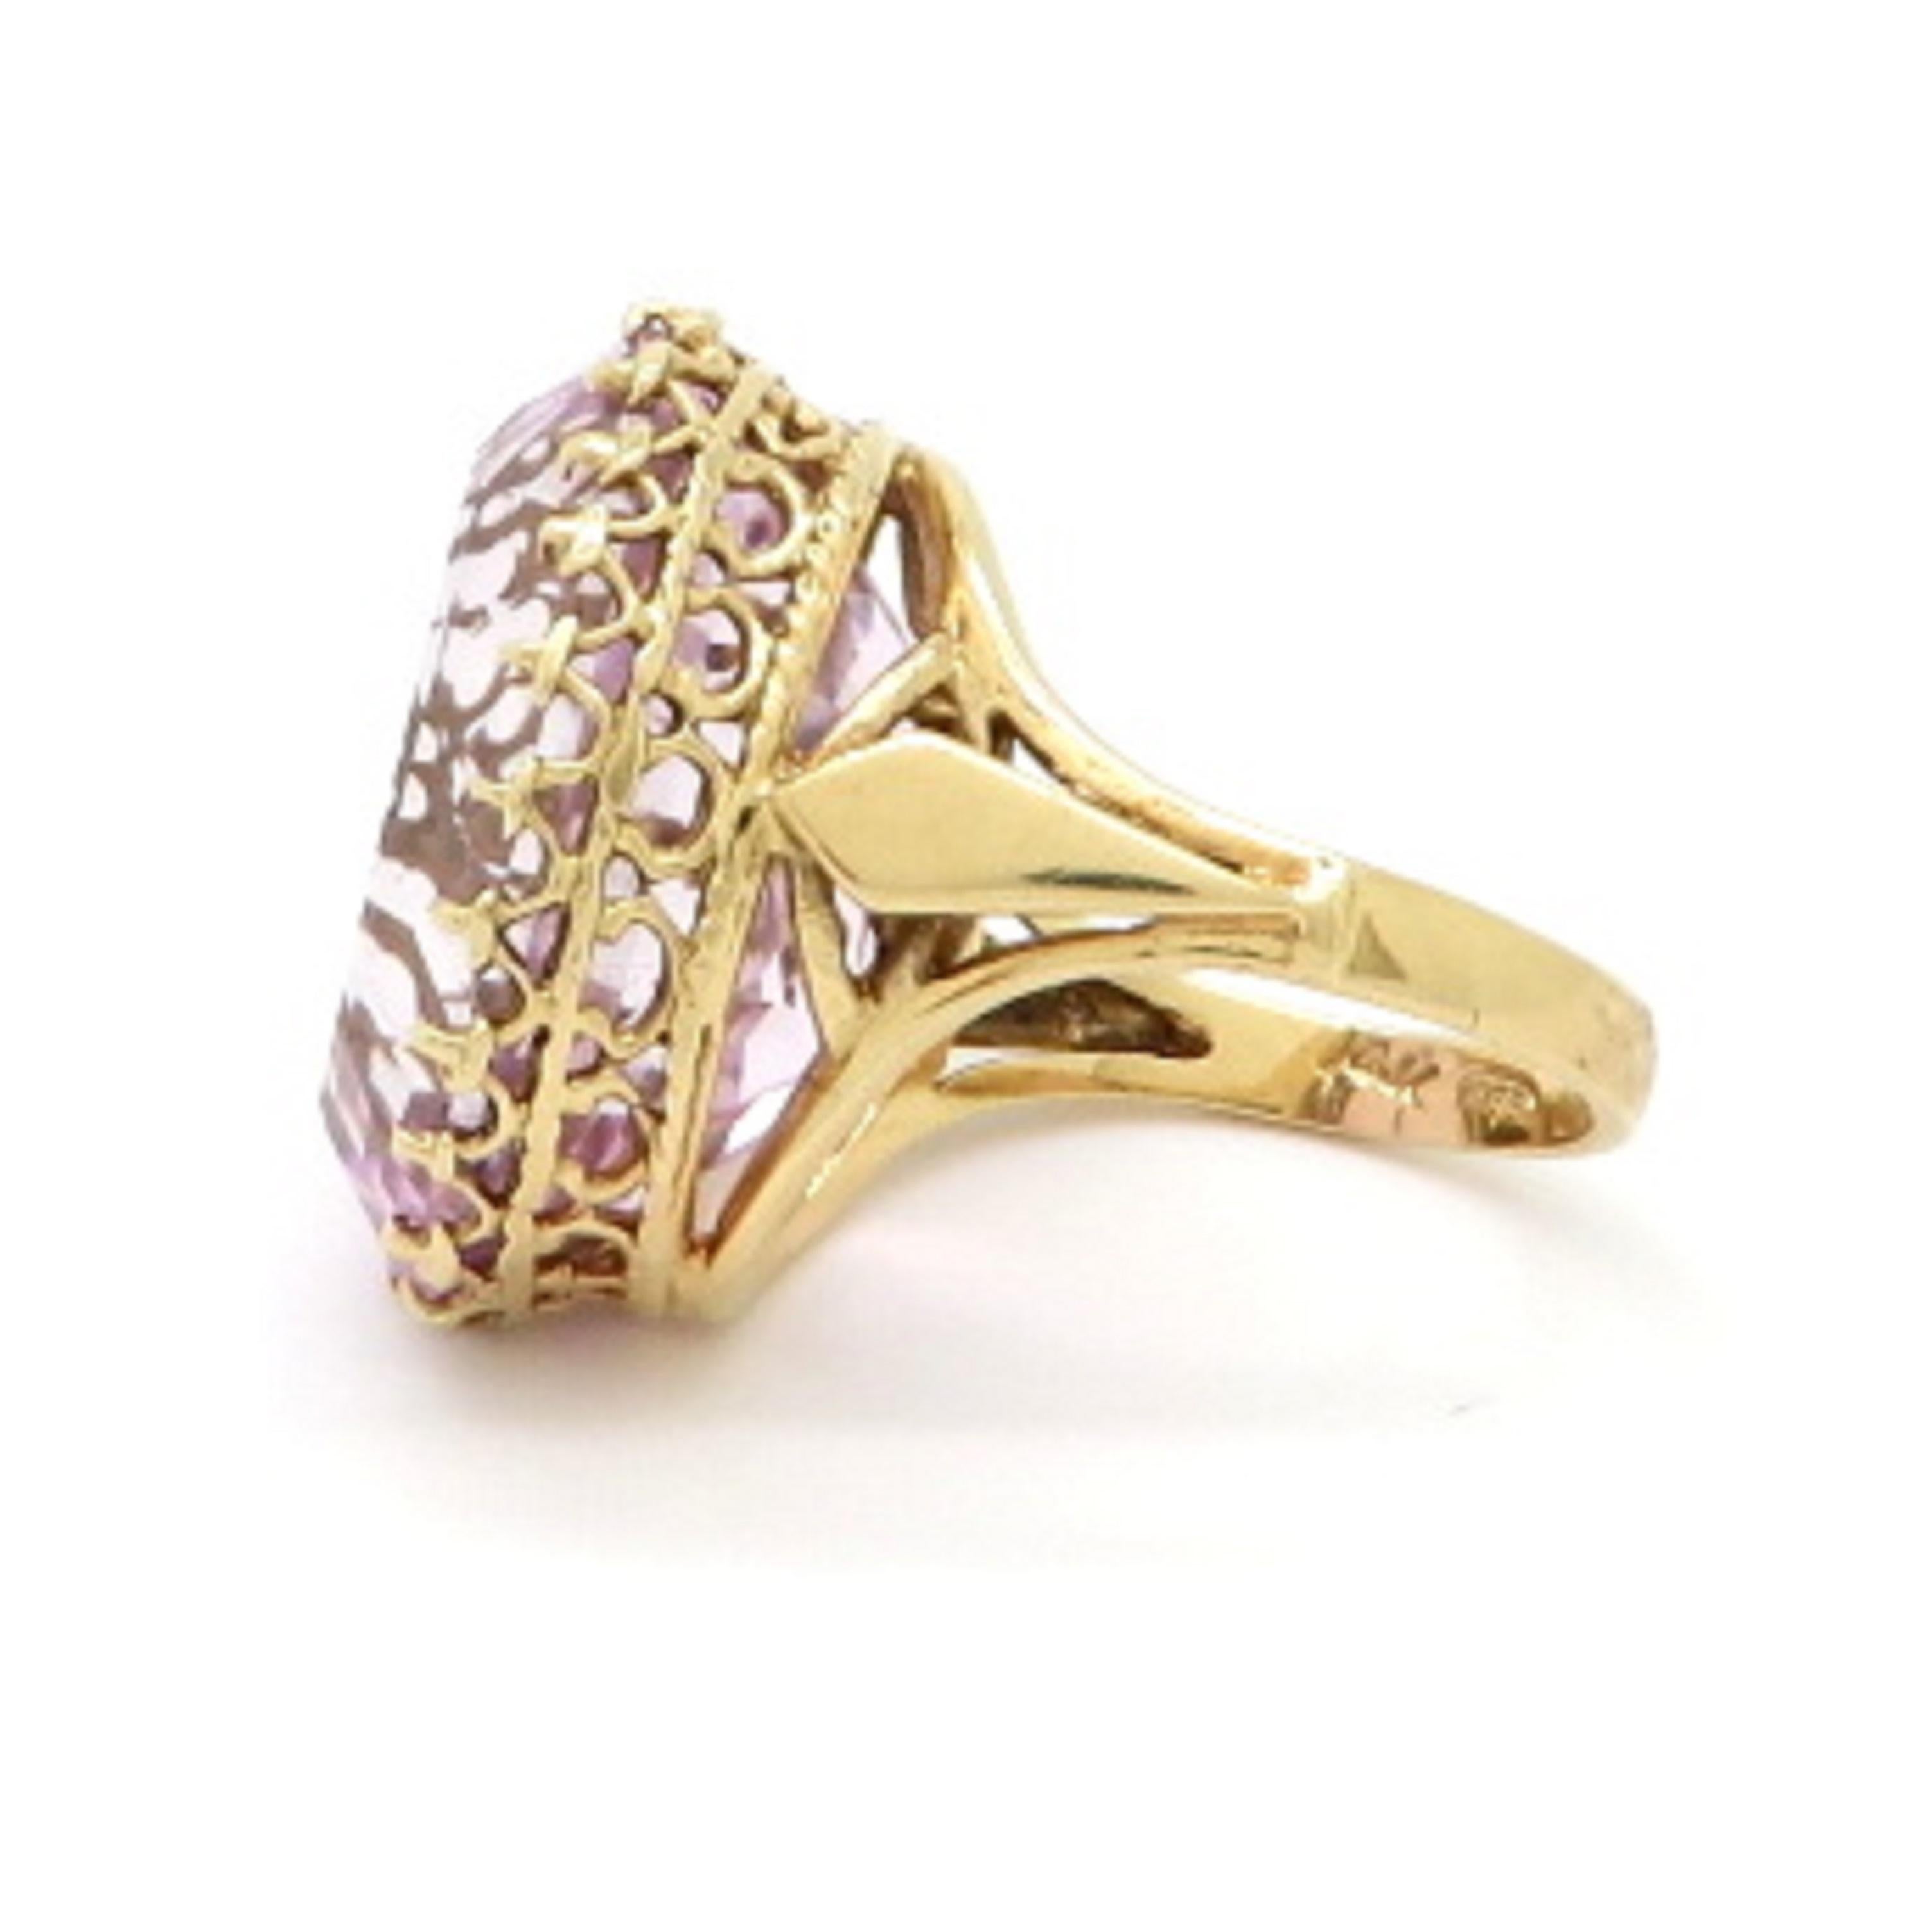 Antique Victorian Style 14 Karat Yellow Gold Oval Kunzite Fashion Ring In Excellent Condition For Sale In Scottsdale, AZ